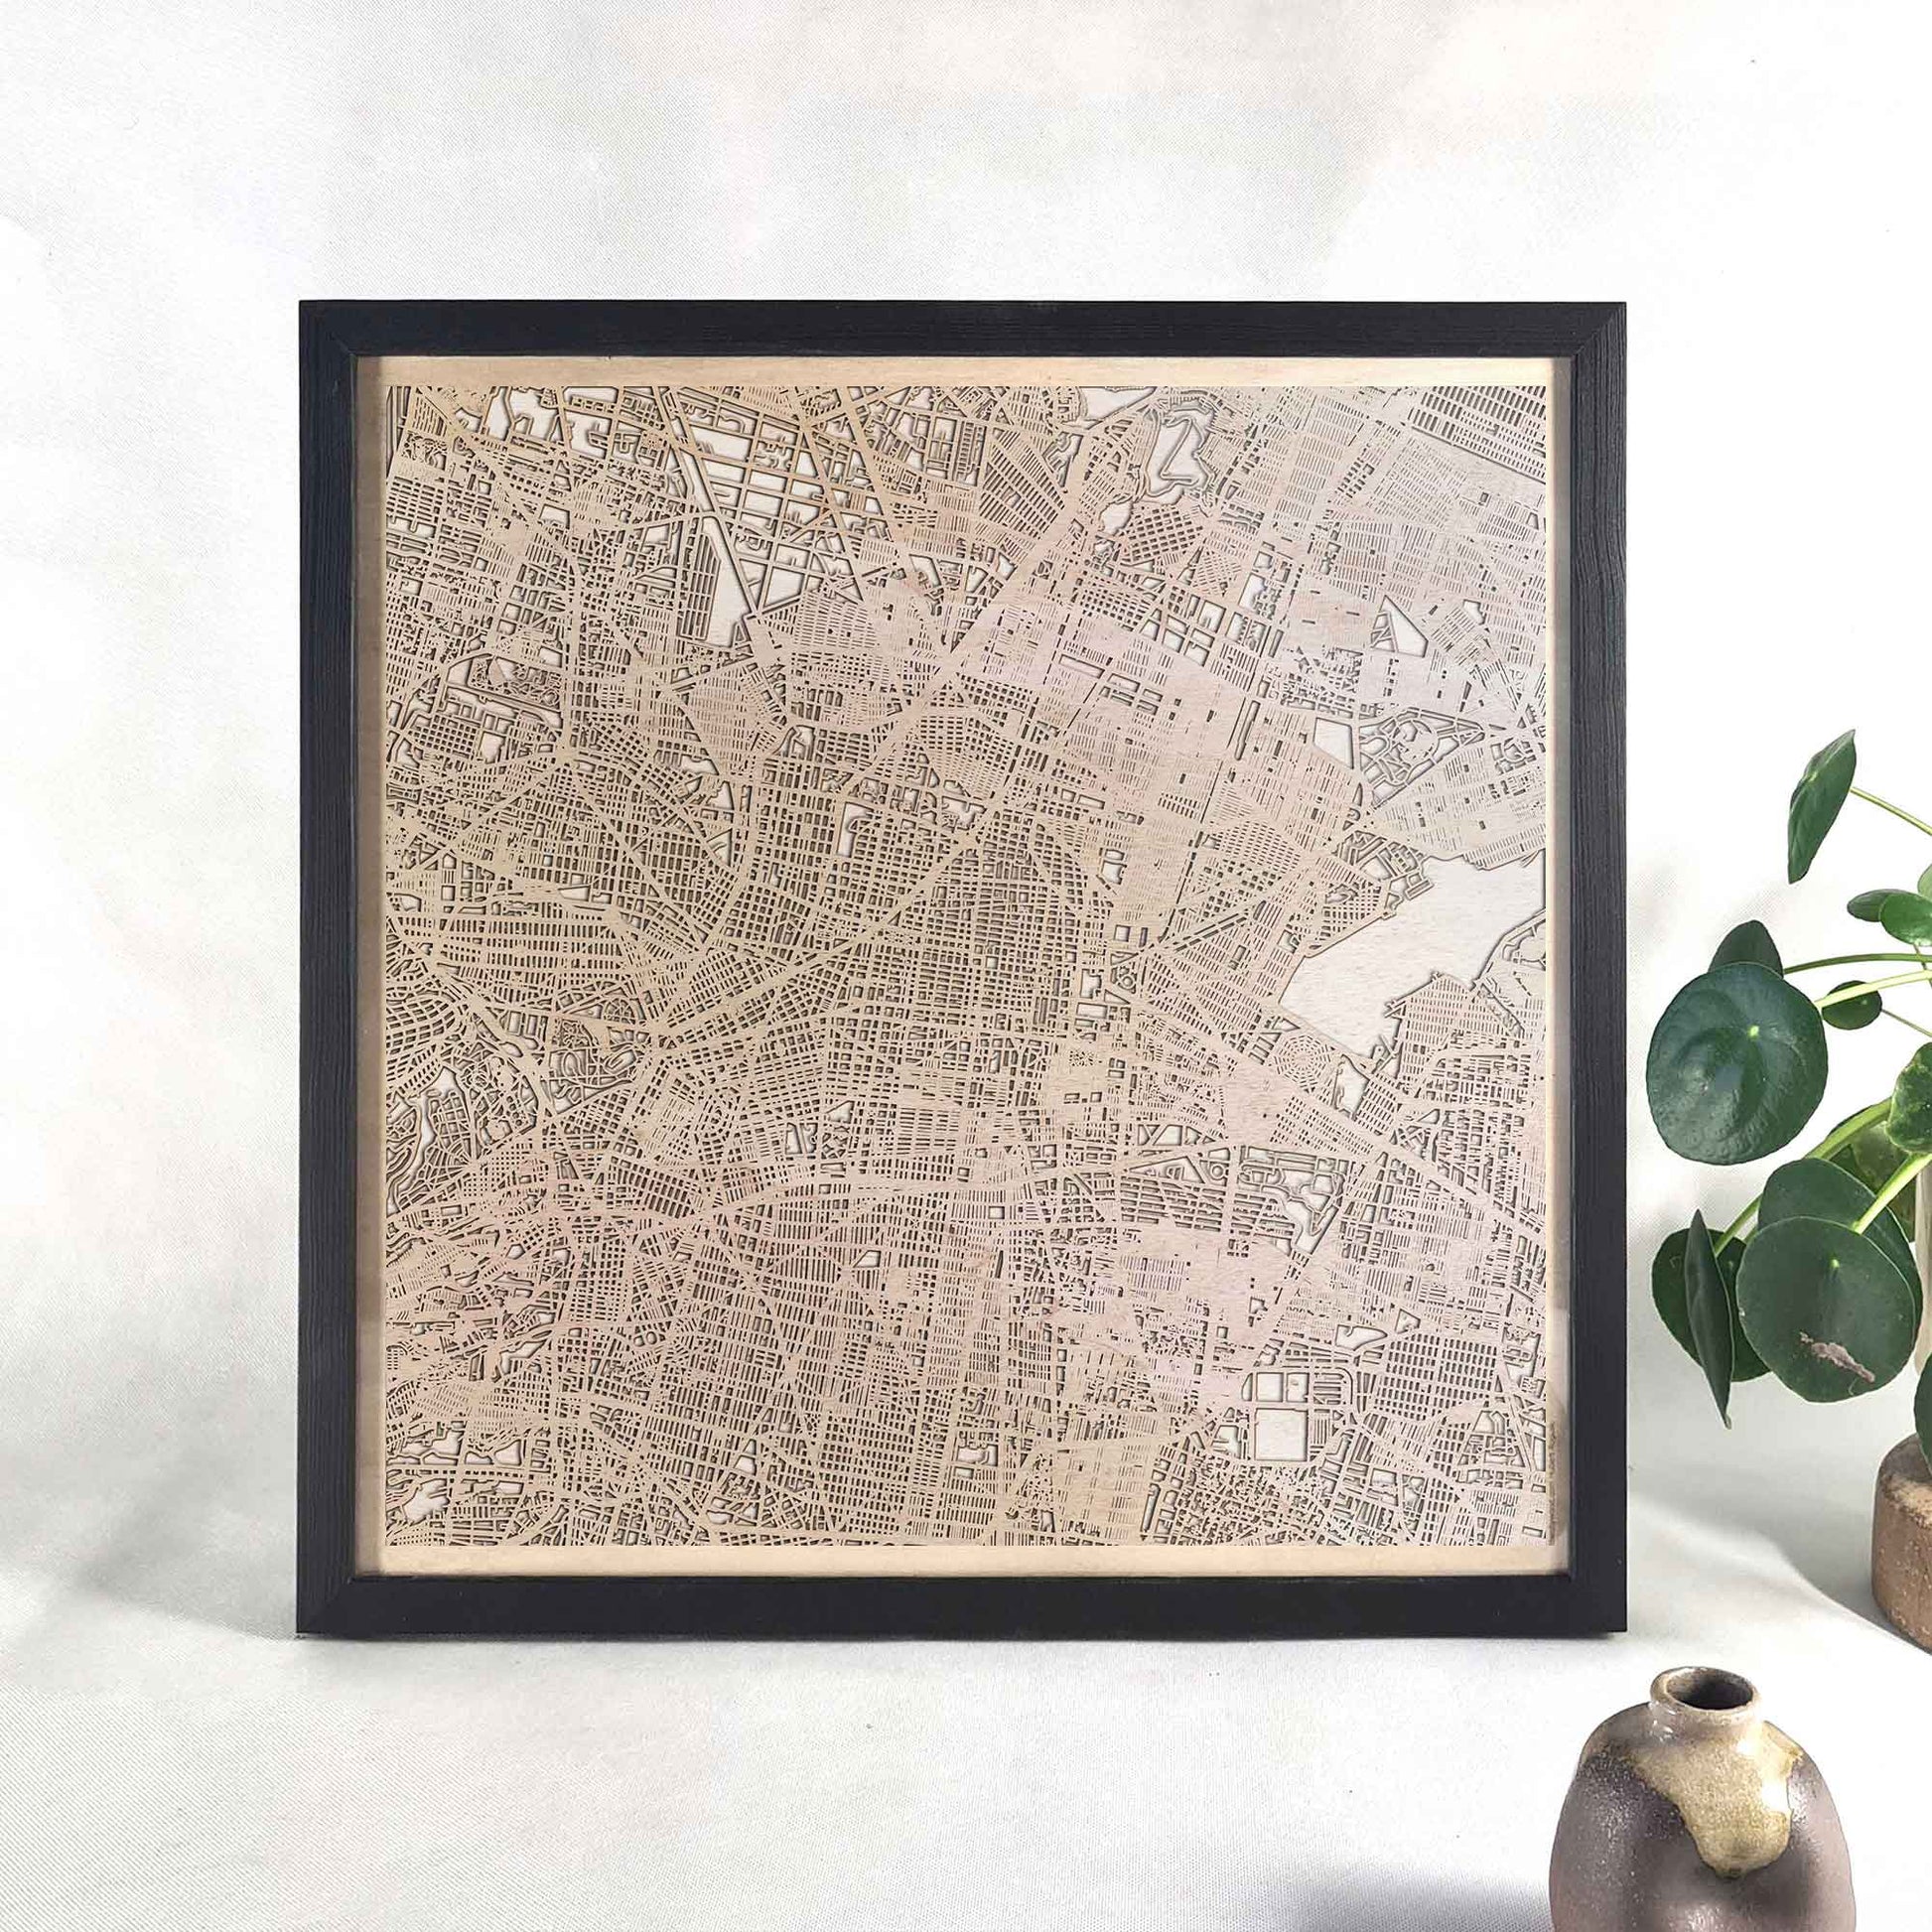 Mexico Wooden Map by CityWood - Custom Wood Map Art - Unique Laser Cut Engraved - Anniversary Gift